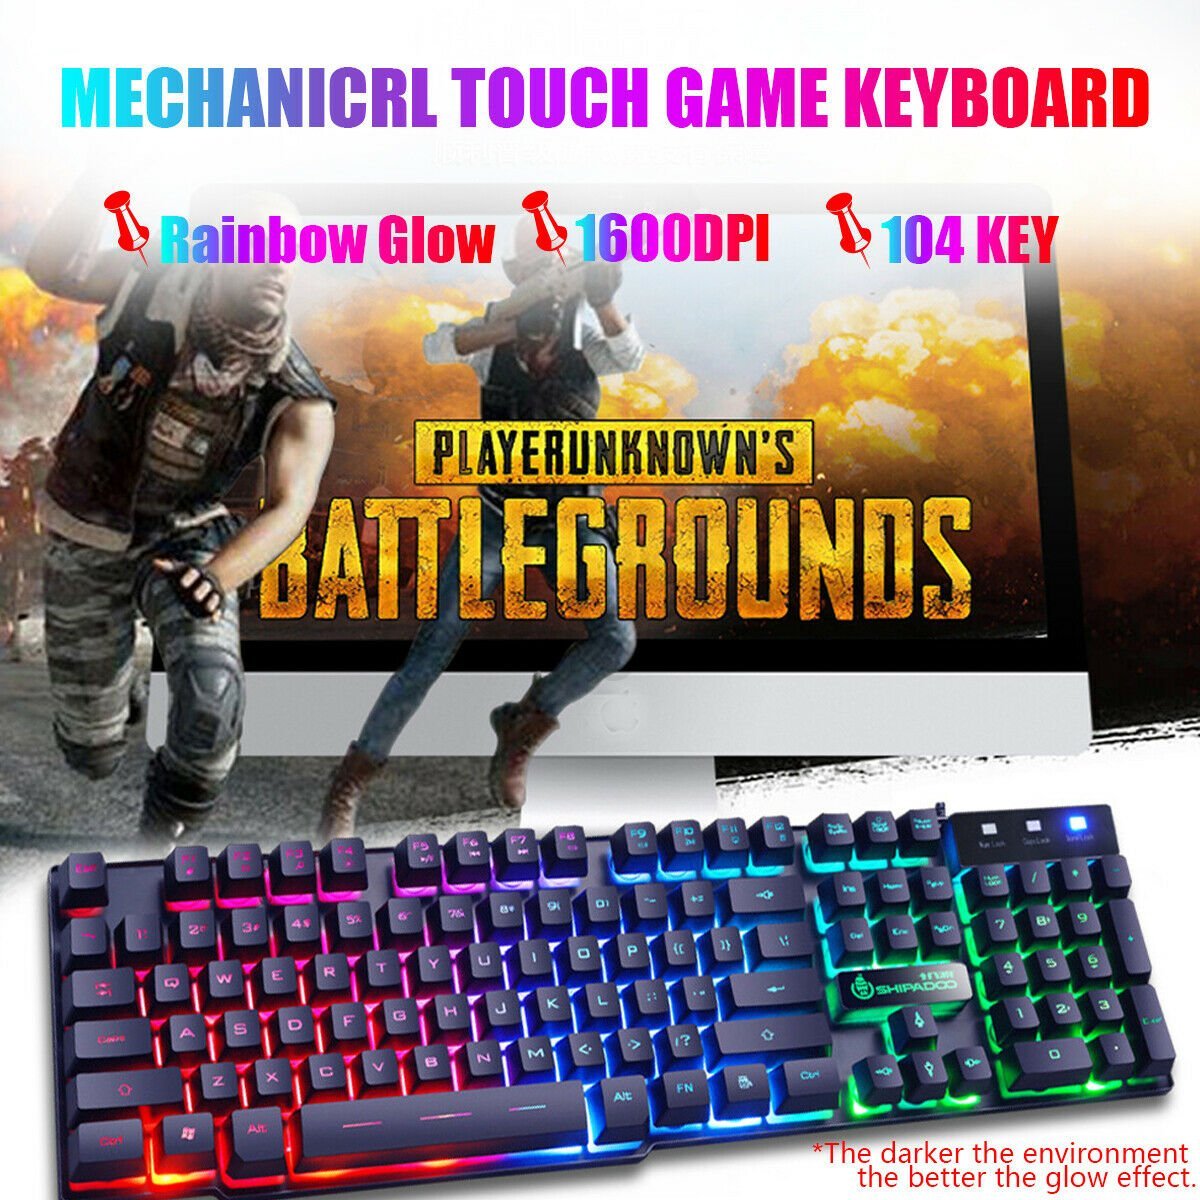 Gaming Keyboard with Mouse Set for PC Laptop Rainbow Backlight Usb Ergonomic